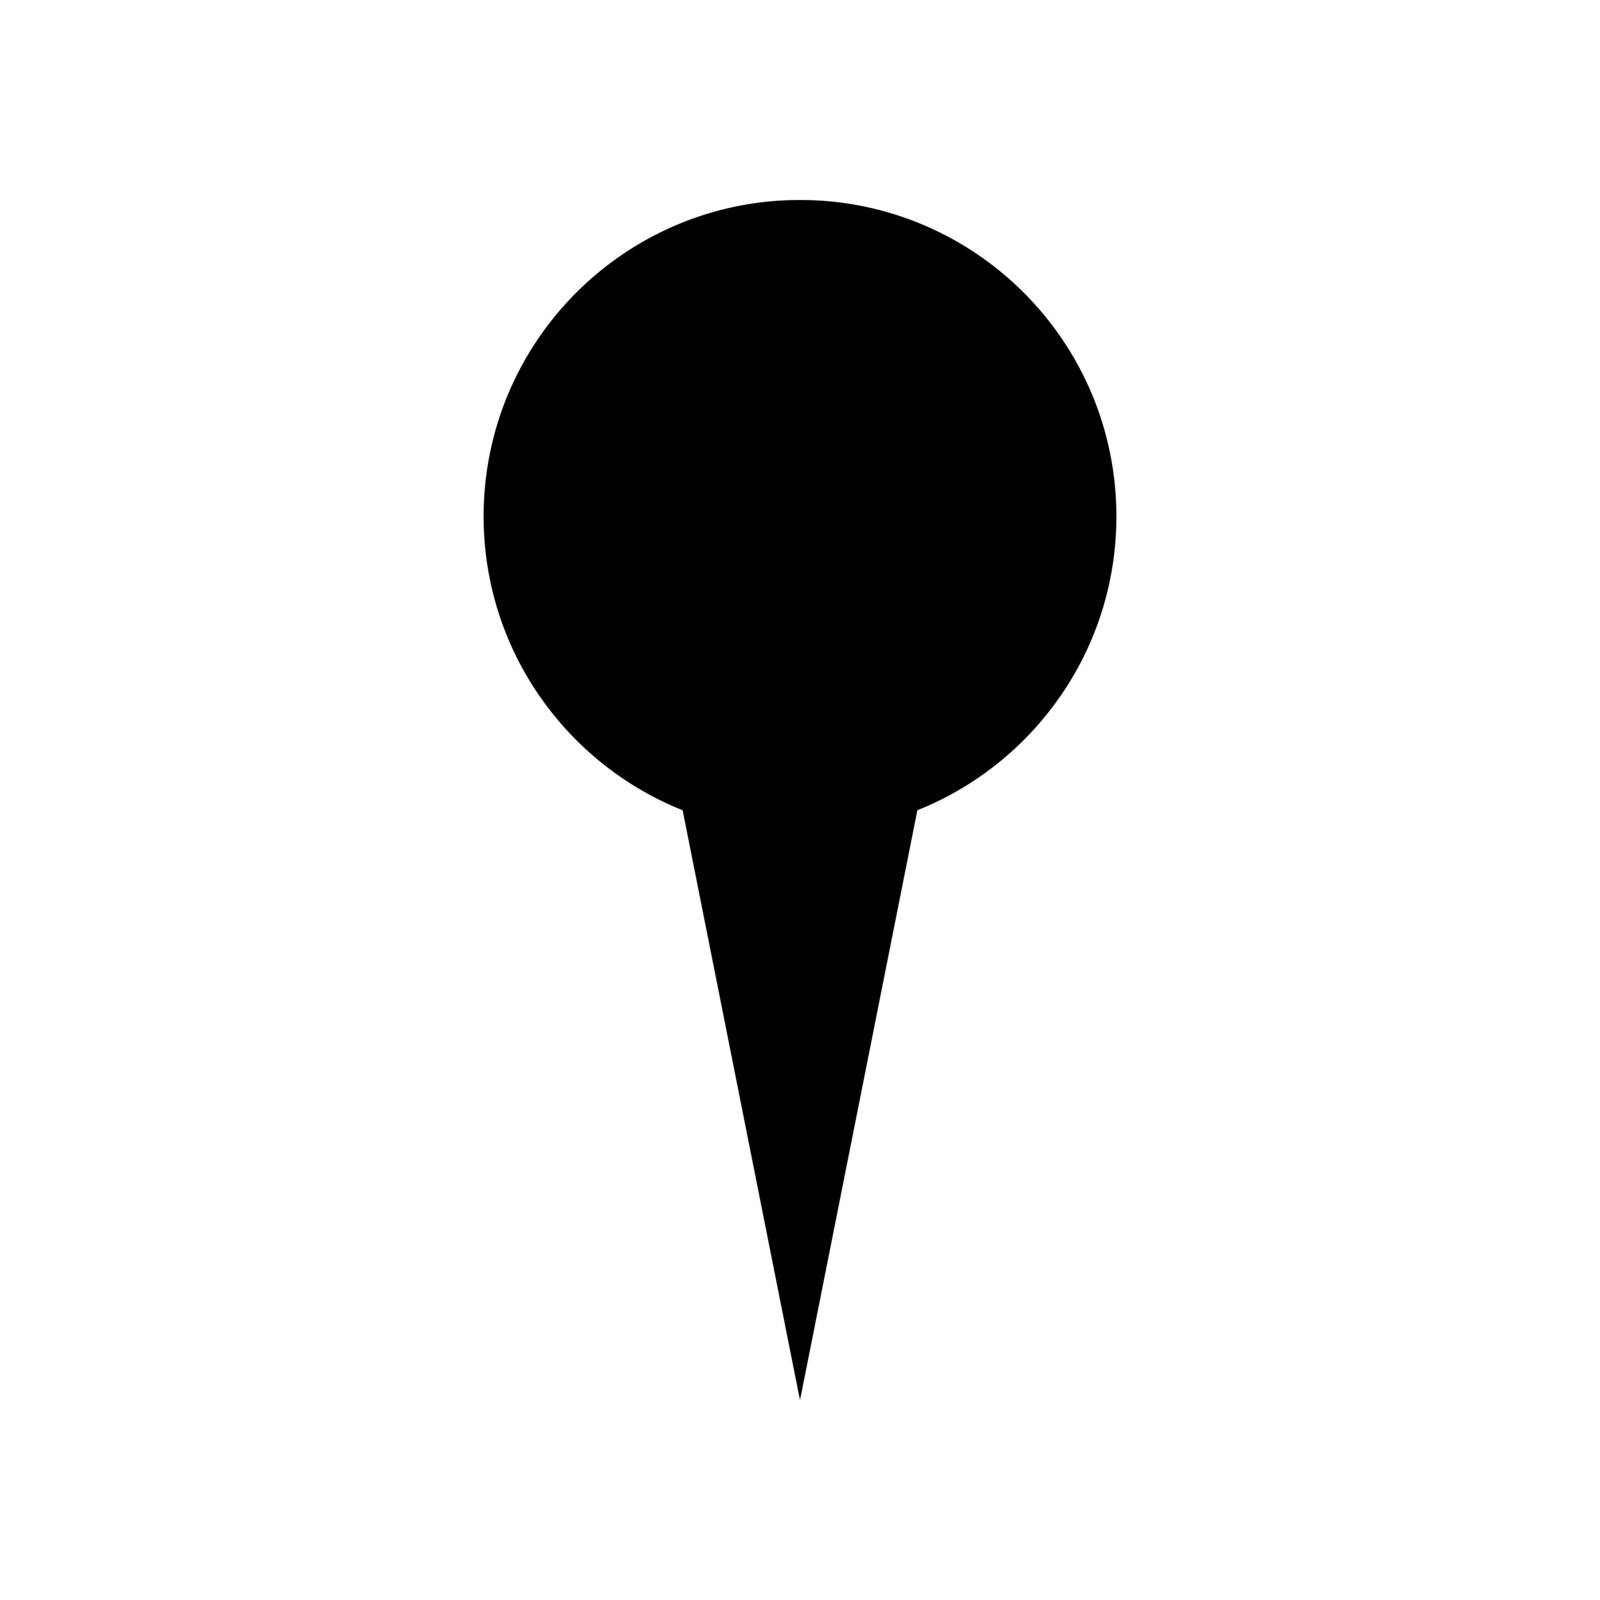 Location indicator or pin black icon . by serhii435